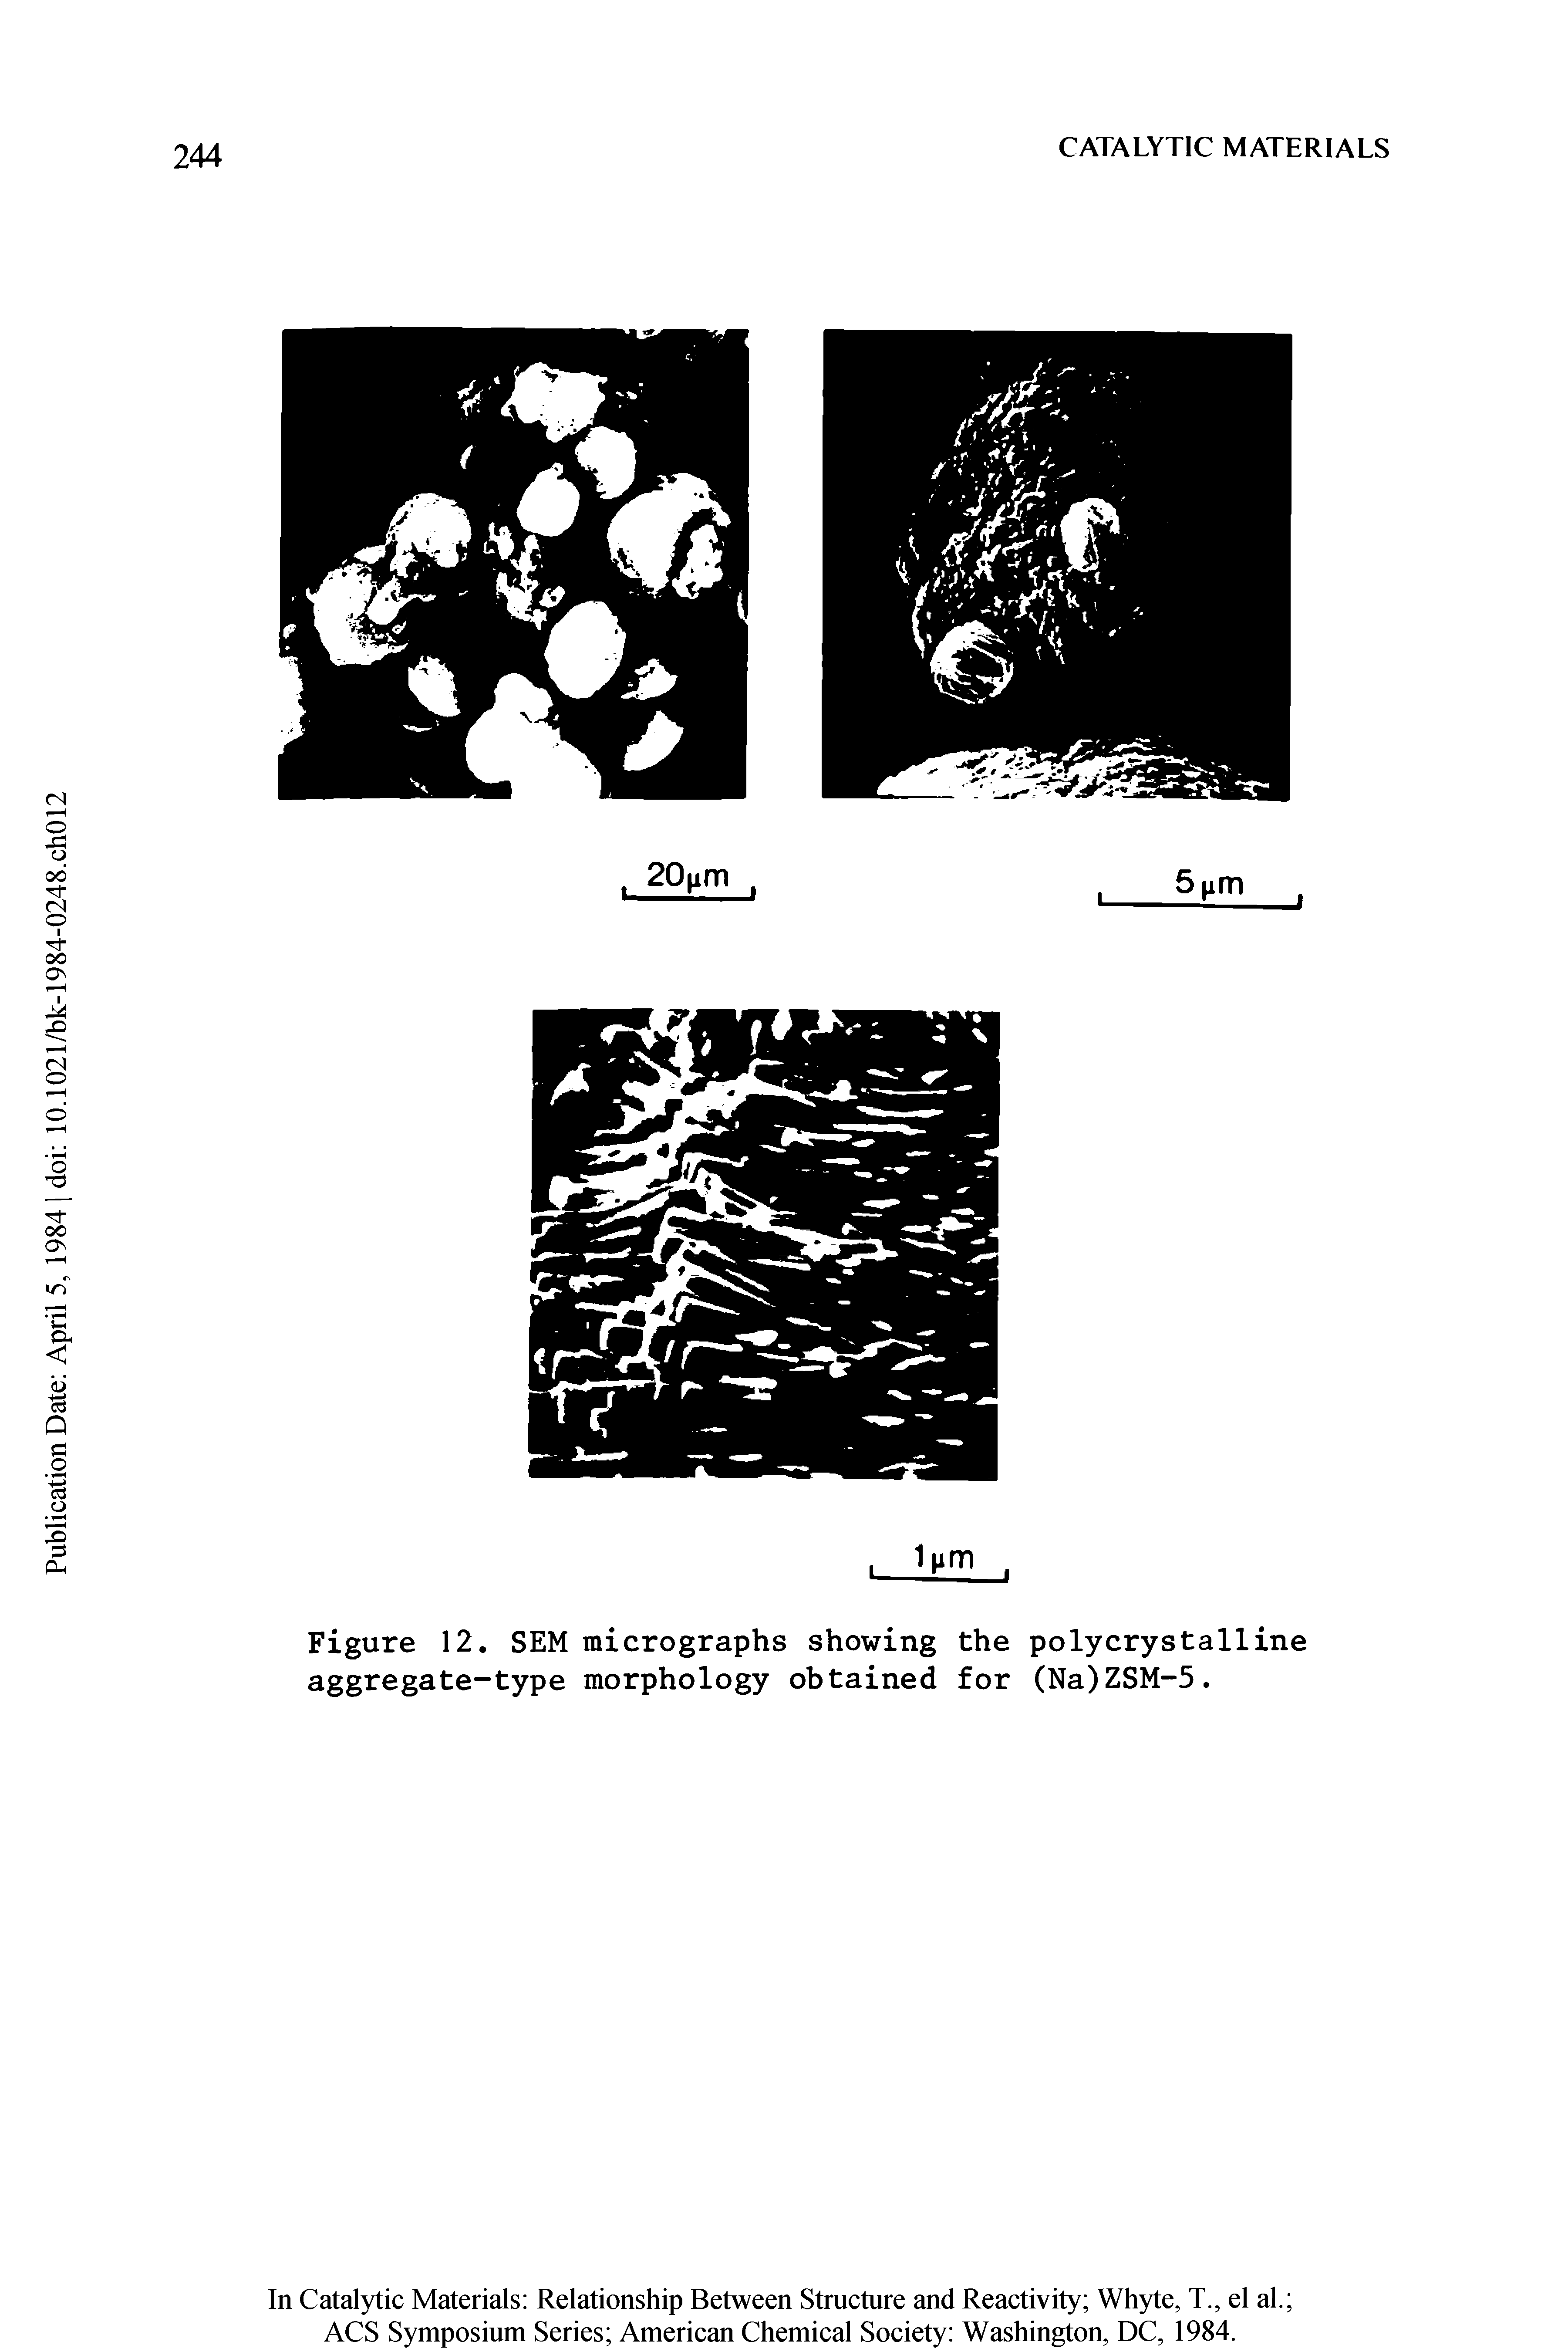 Figure 12. SEM micrographs showing the polycrystalline aggregate-type morphology obtained for (Na)ZSM-5.